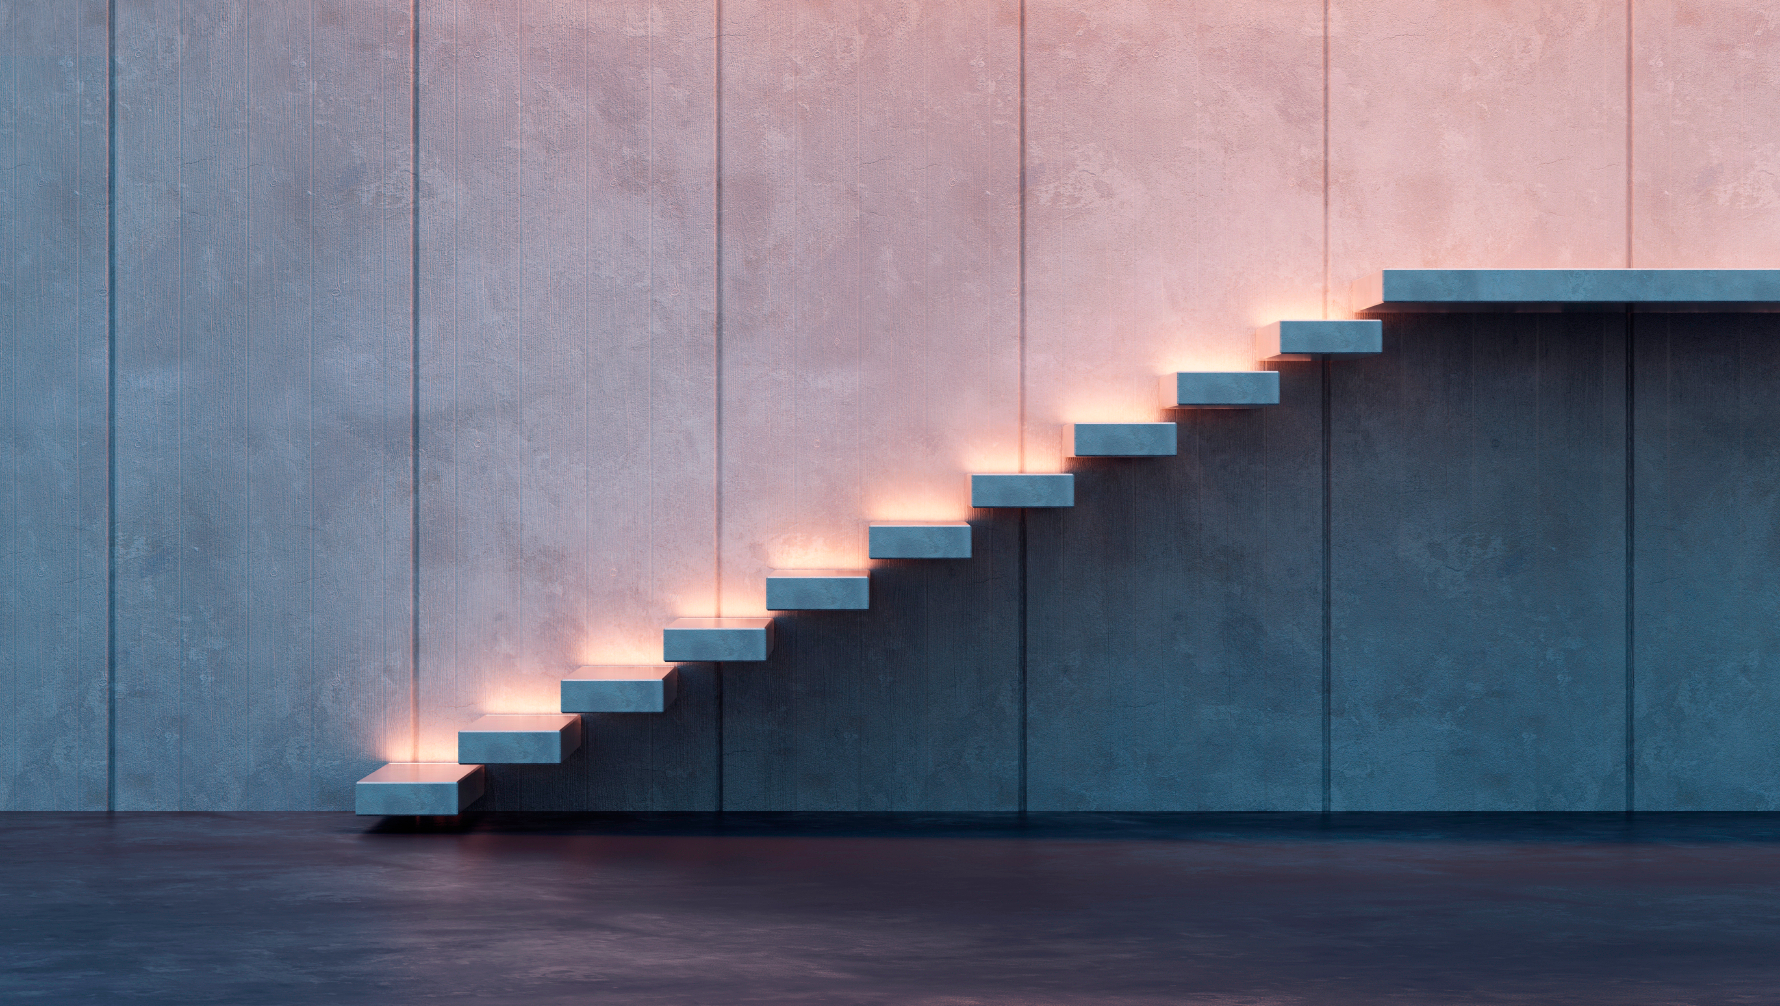 steps going up reflecting the increase in revenue and occupancy a hotel can gain from adapting a dynamic pricing strategy